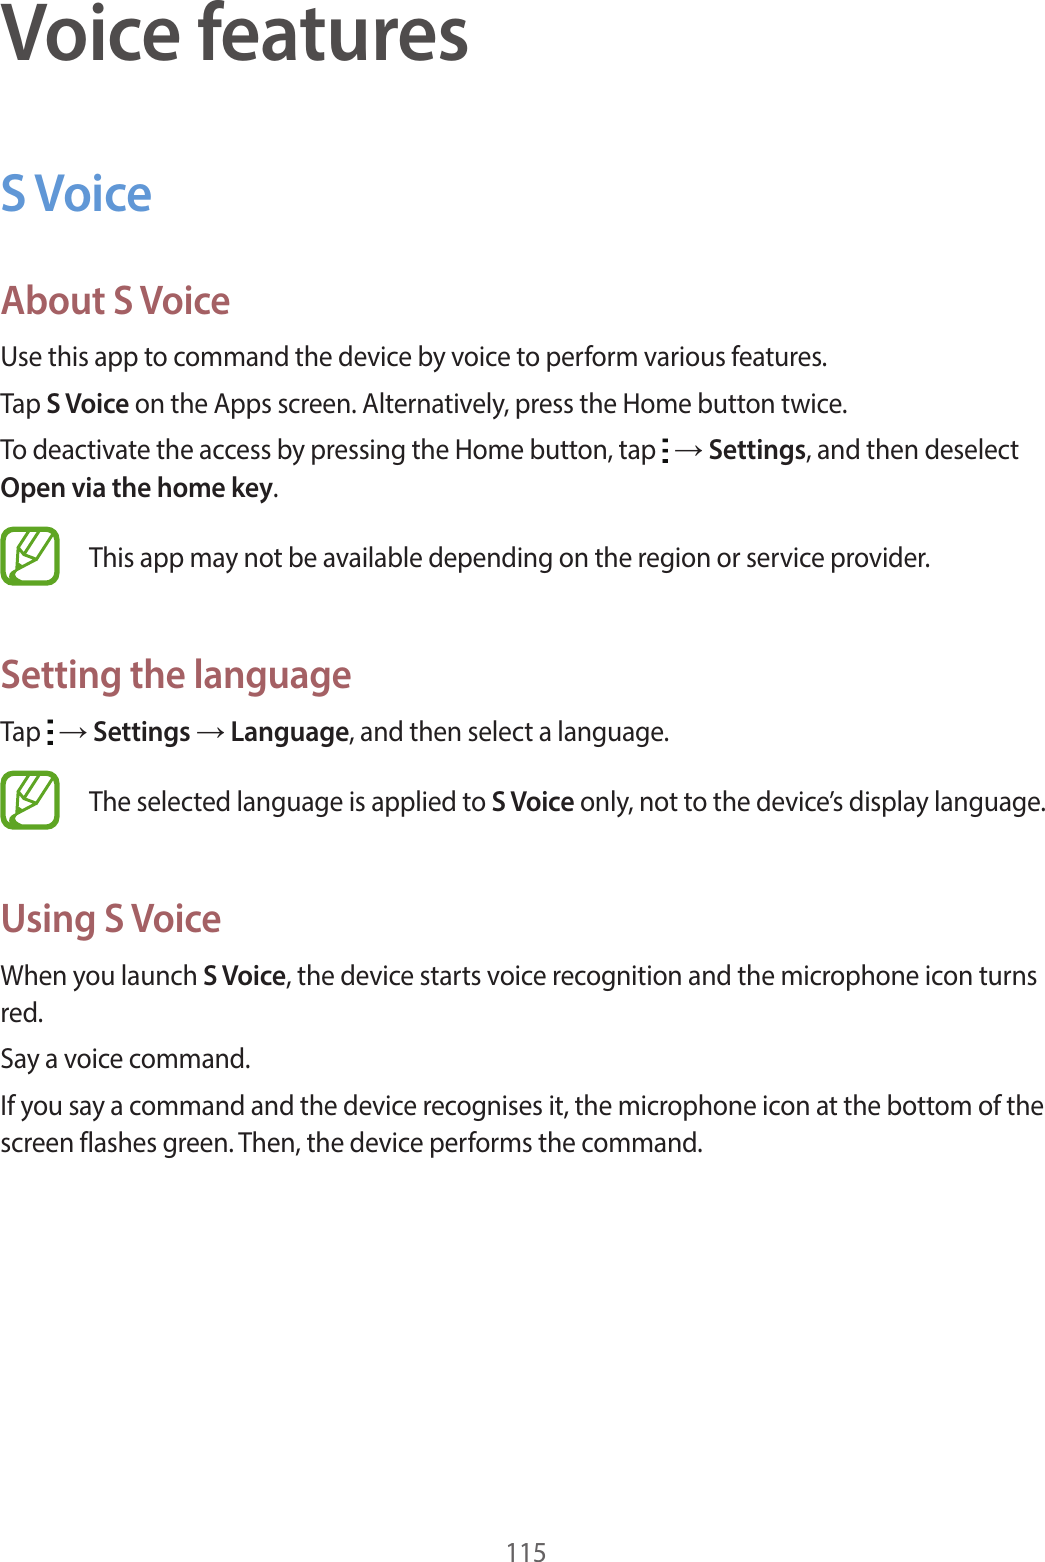 115Voice featuresS VoiceAbout S VoiceUse this app to command the device by voice to perform various features.Tap S Voice on the Apps screen. Alternatively, press the Home button twice.To deactivate the access by pressing the Home button, tap   → Settings, and then deselect Open via the home key.This app may not be available depending on the region or service provider.Setting the languageTap   → Settings → Language, and then select a language.The selected language is applied to S Voice only, not to the device’s display language.Using S VoiceWhen you launch S Voice, the device starts voice recognition and the microphone icon turns red.Say a voice command.If you say a command and the device recognises it, the microphone icon at the bottom of the screen flashes green. Then, the device performs the command.